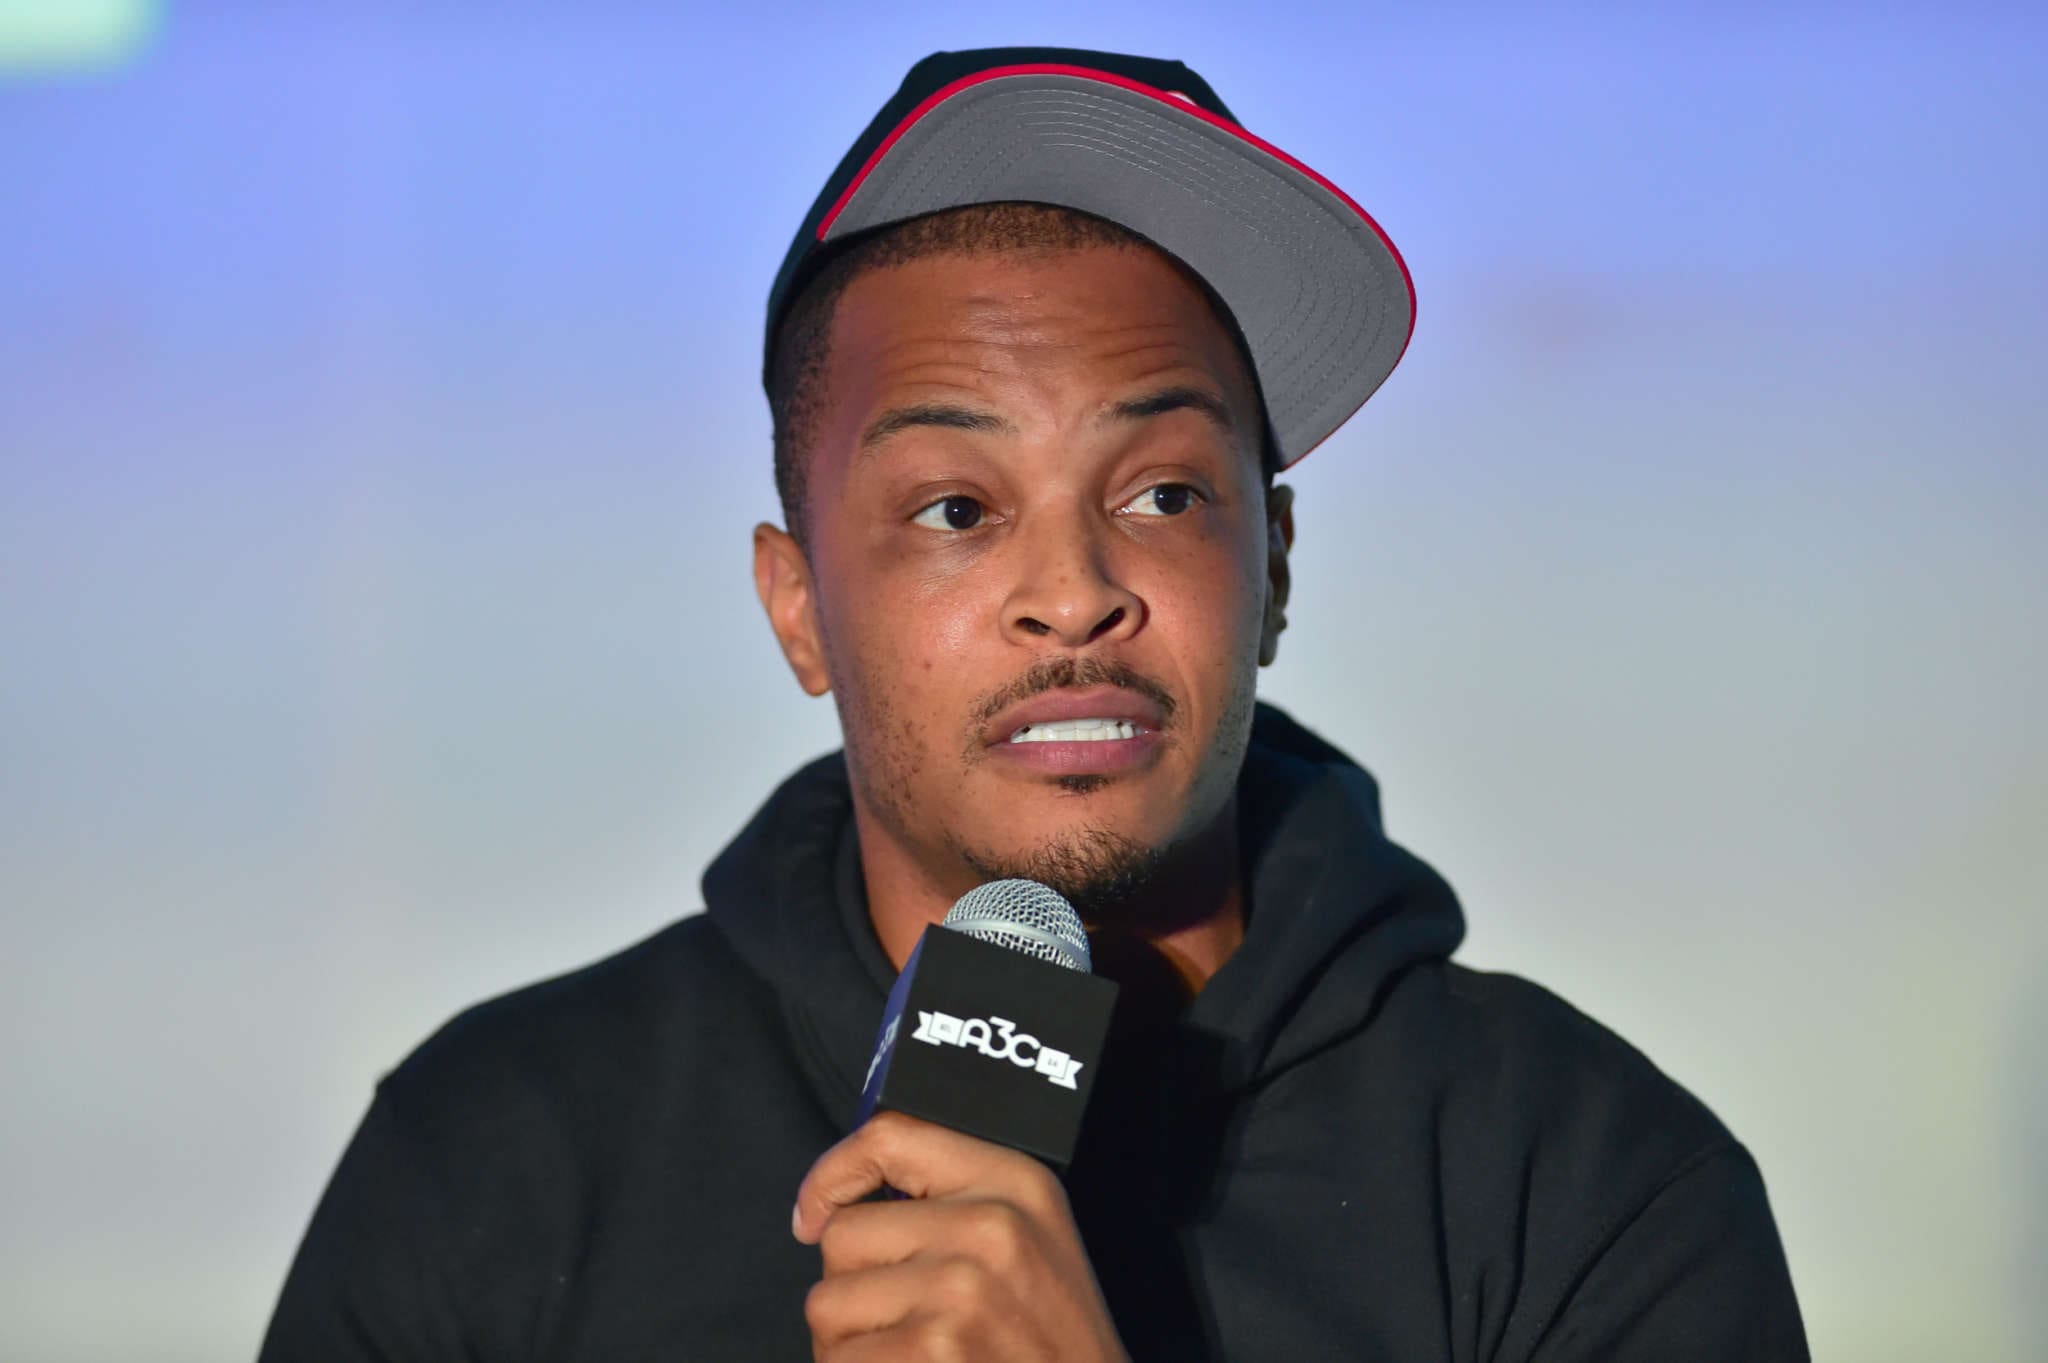 T.I.'s Fans Can Meet Him This Saturday At An Event In Miami